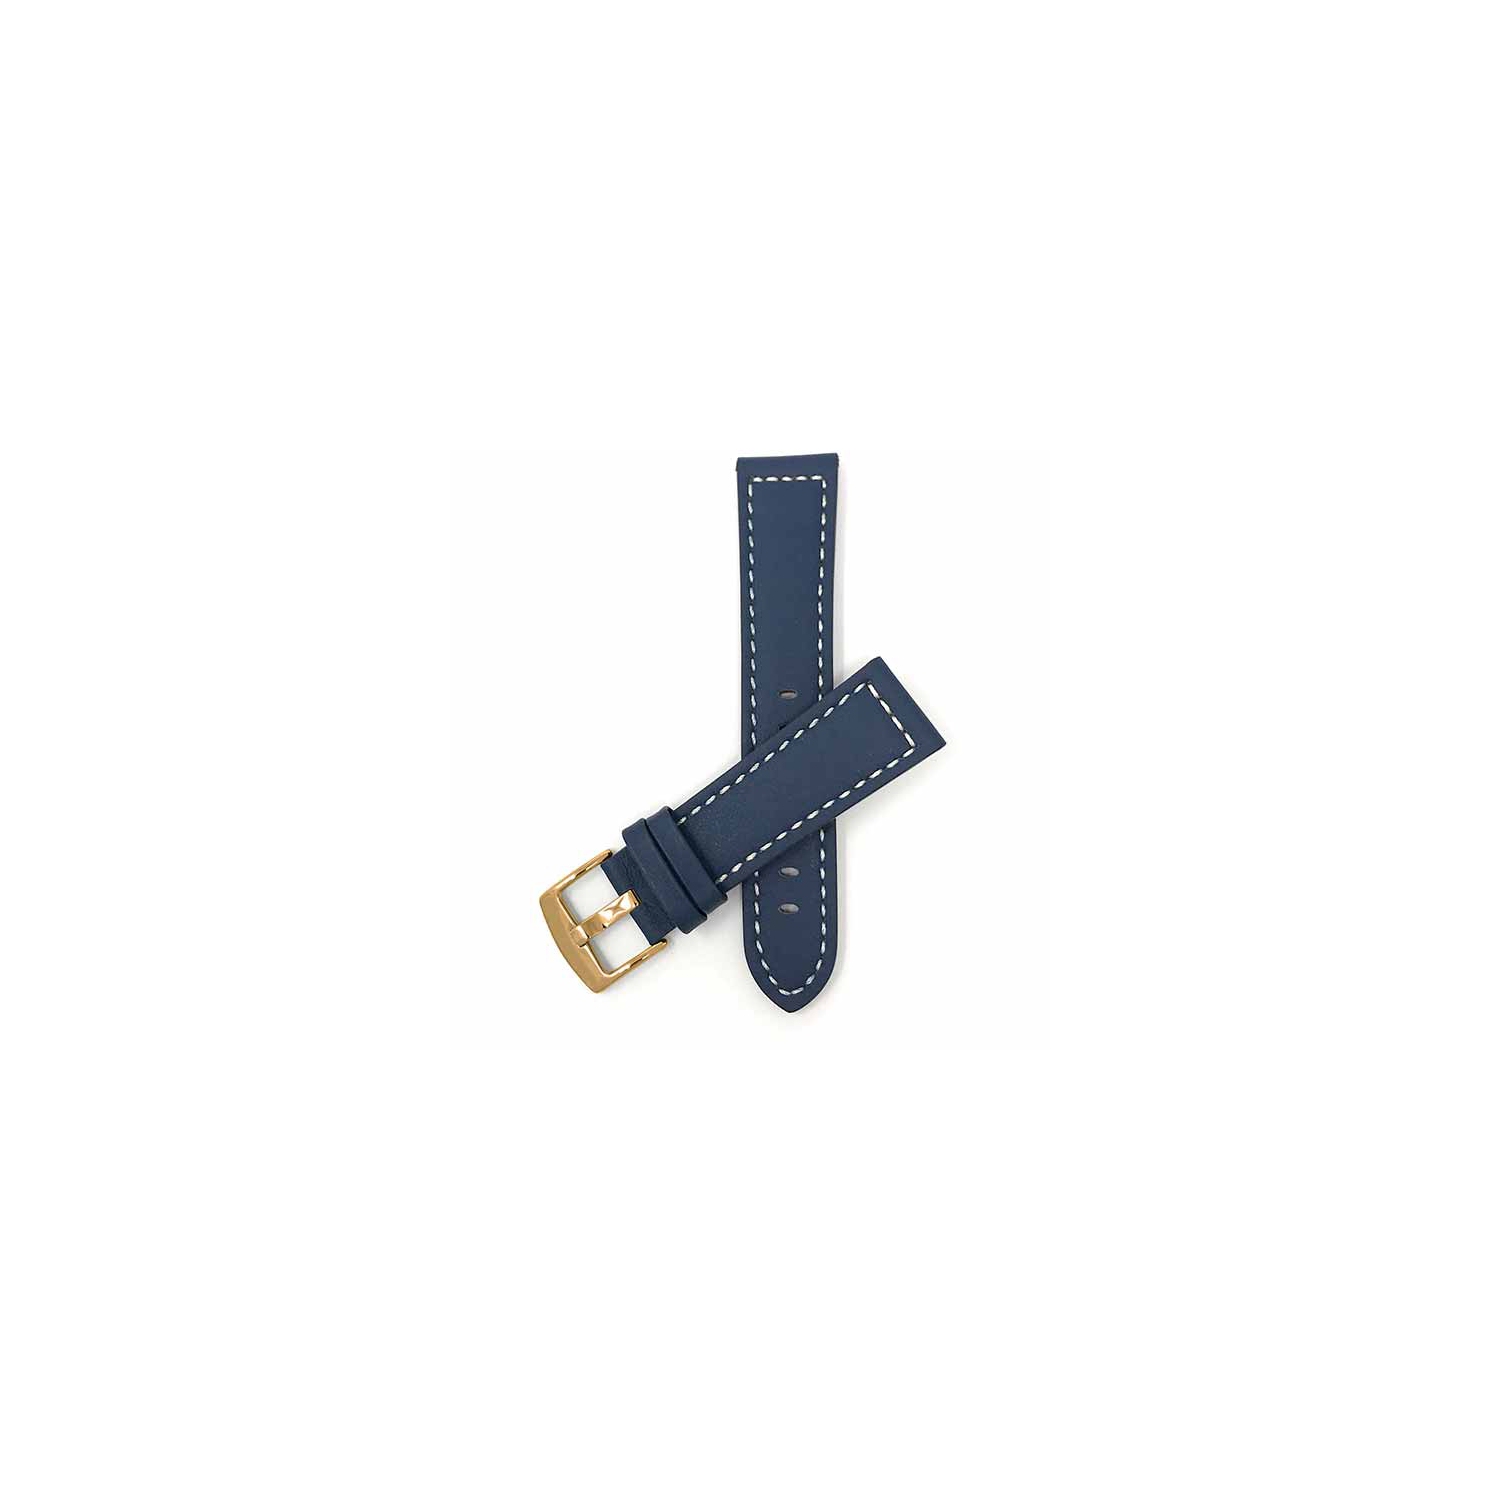 Bandini Thick Leather Racer Smartwatch Strap, White Stitch For Michael Kors Bradshaw - 22mm, Blue / Gold Buckle